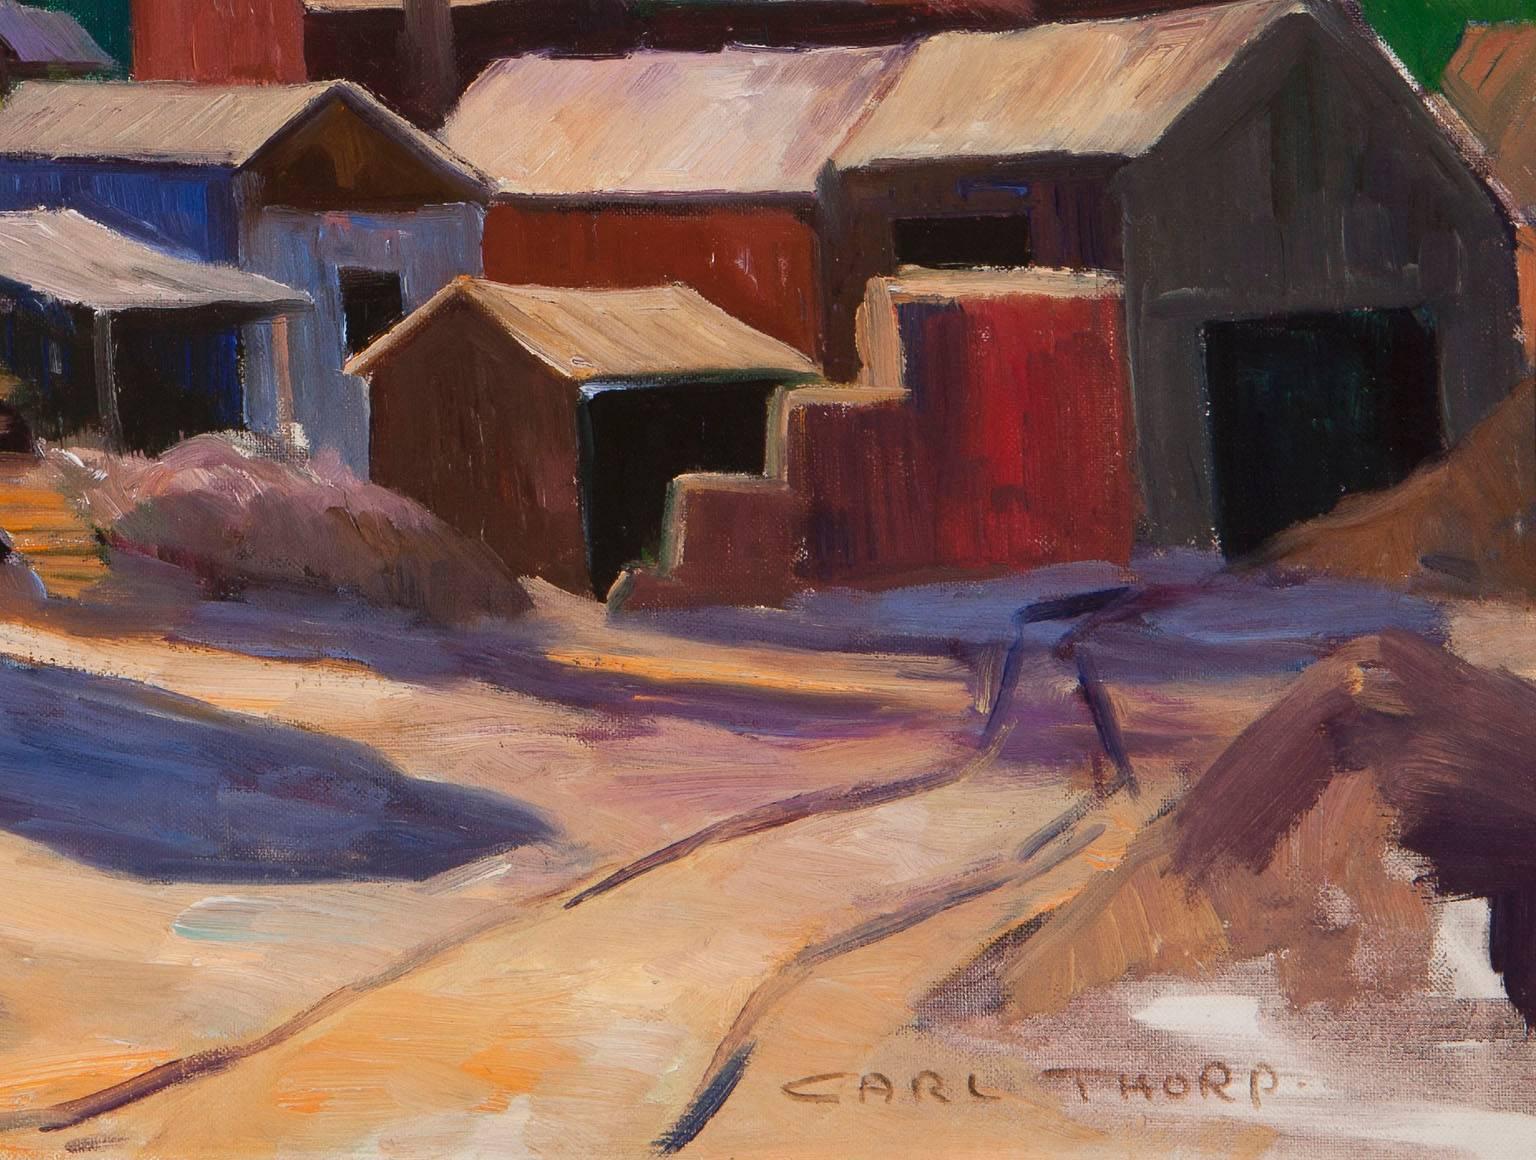 Gold Mine, Mother Lode - Painting by Carl Thorp